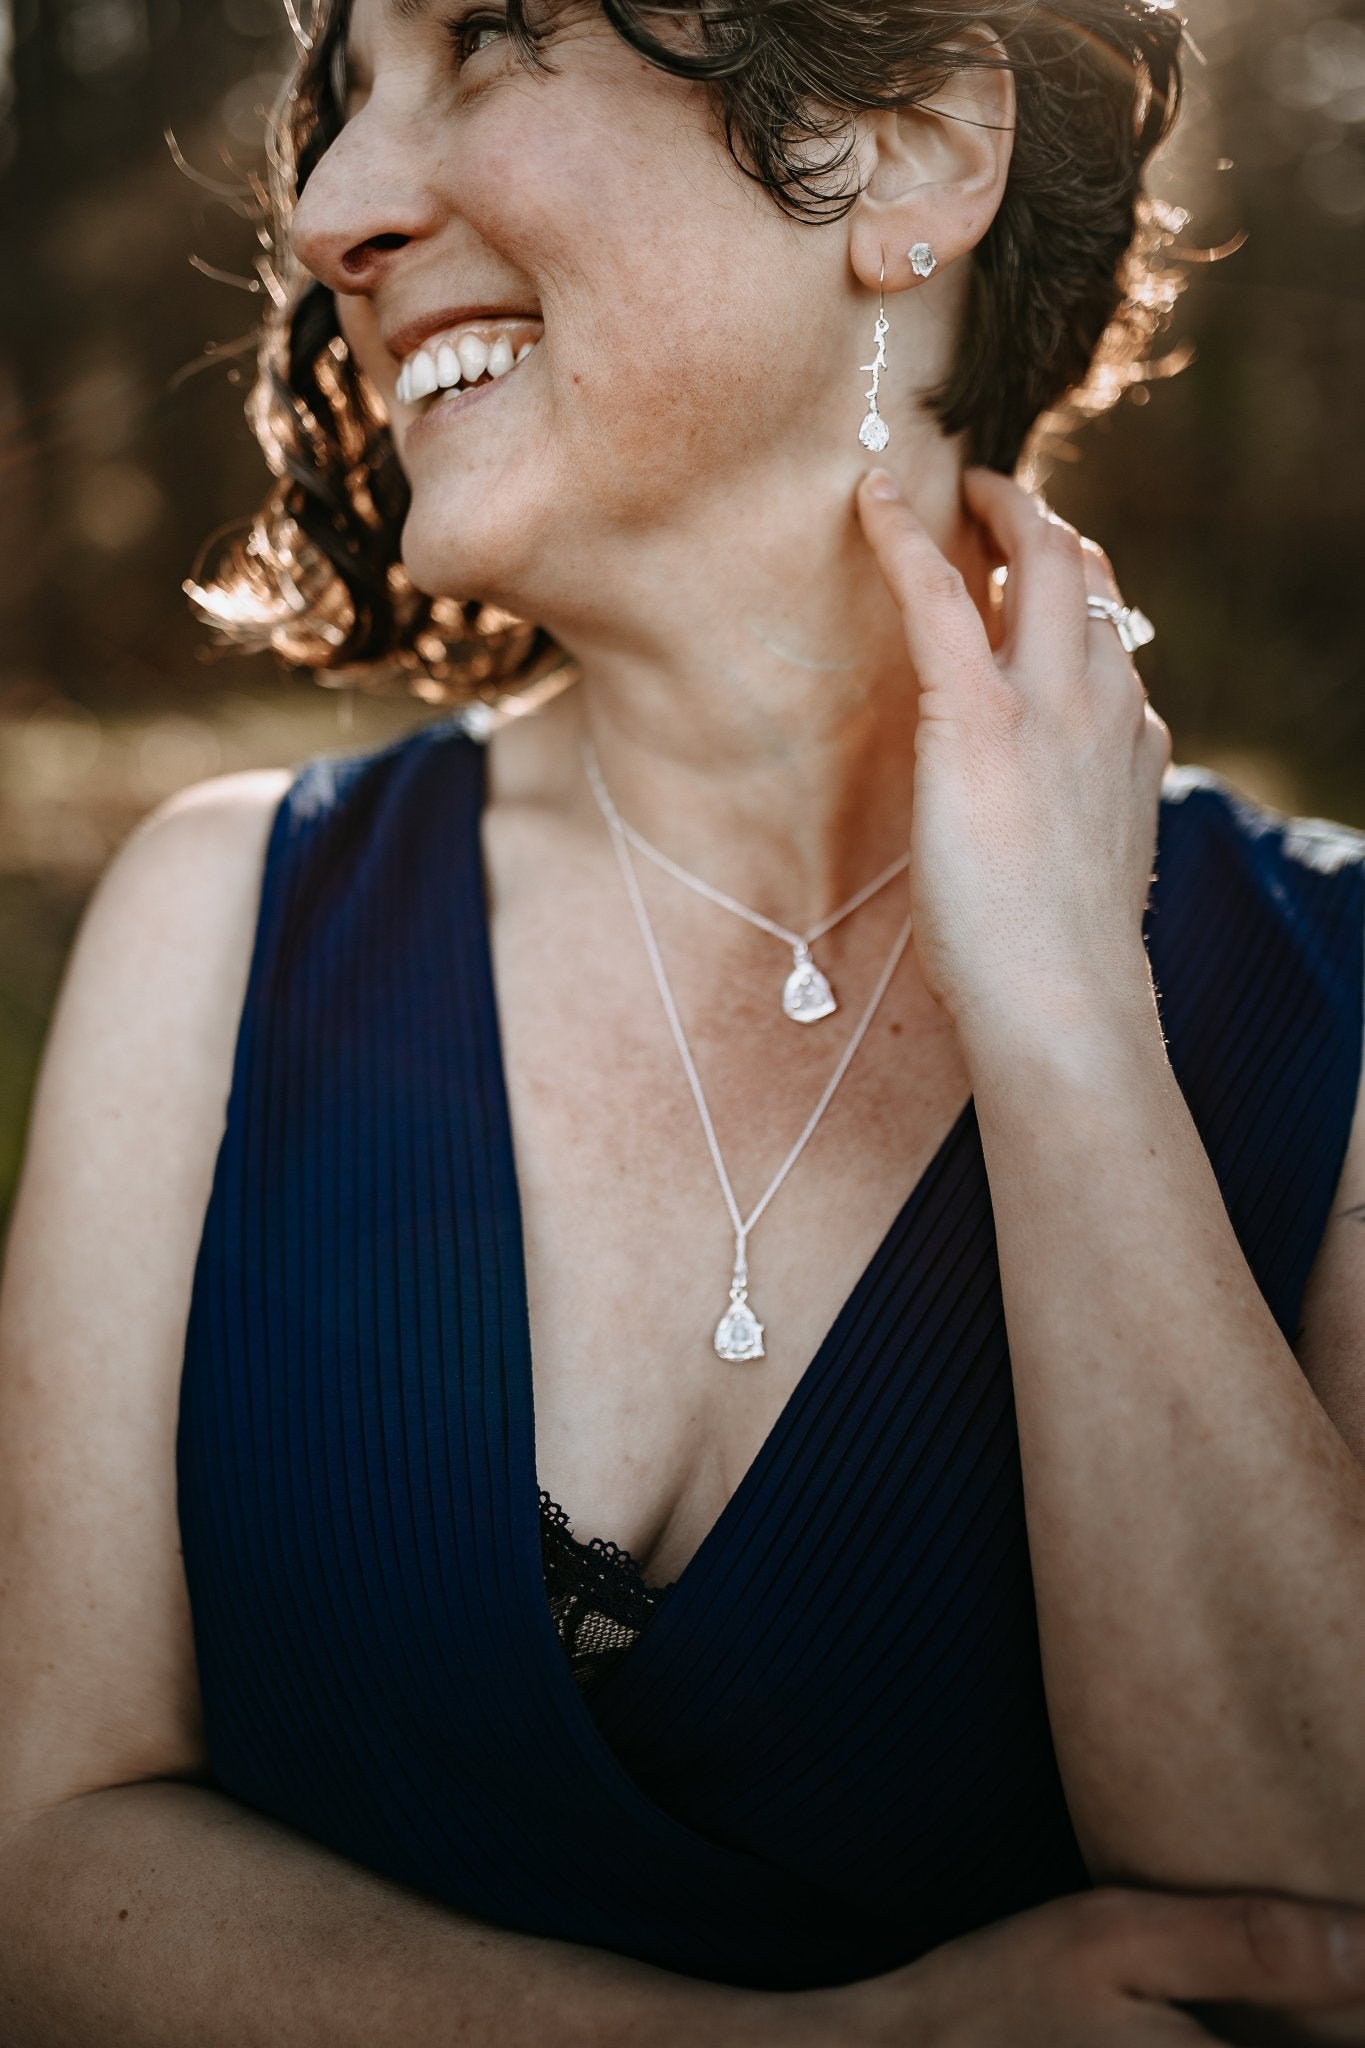 model wearing Herkimer diamond silver branch earrings with matching pendant necklaces and studs